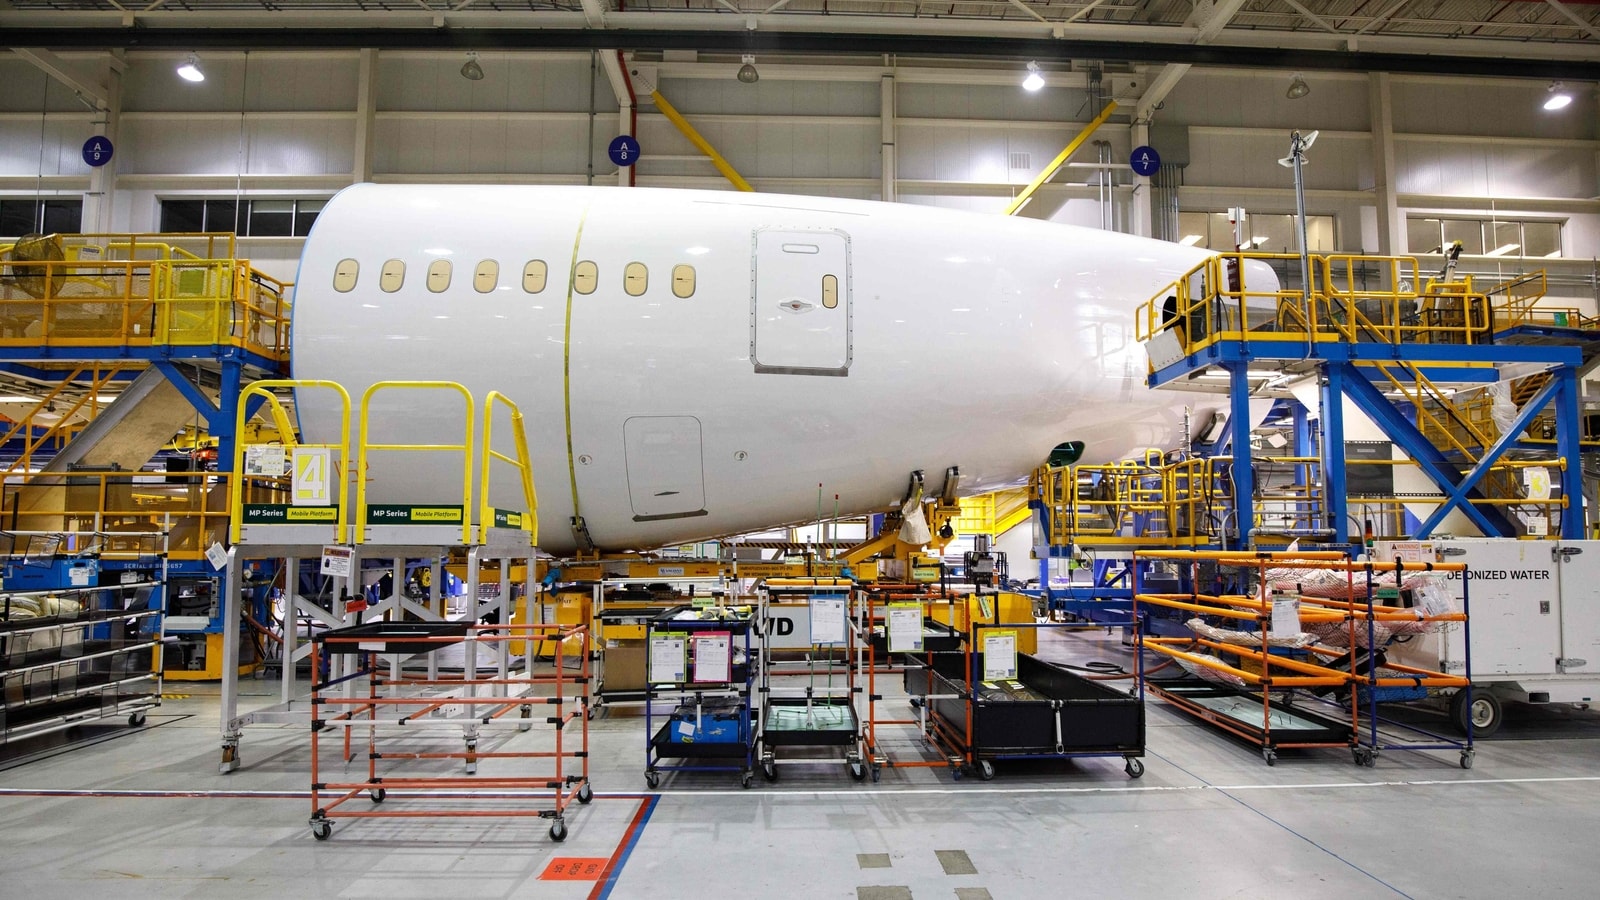 Boeing is under FAA investigation as whistleblower alleges production malpractices in Dreamliner jets